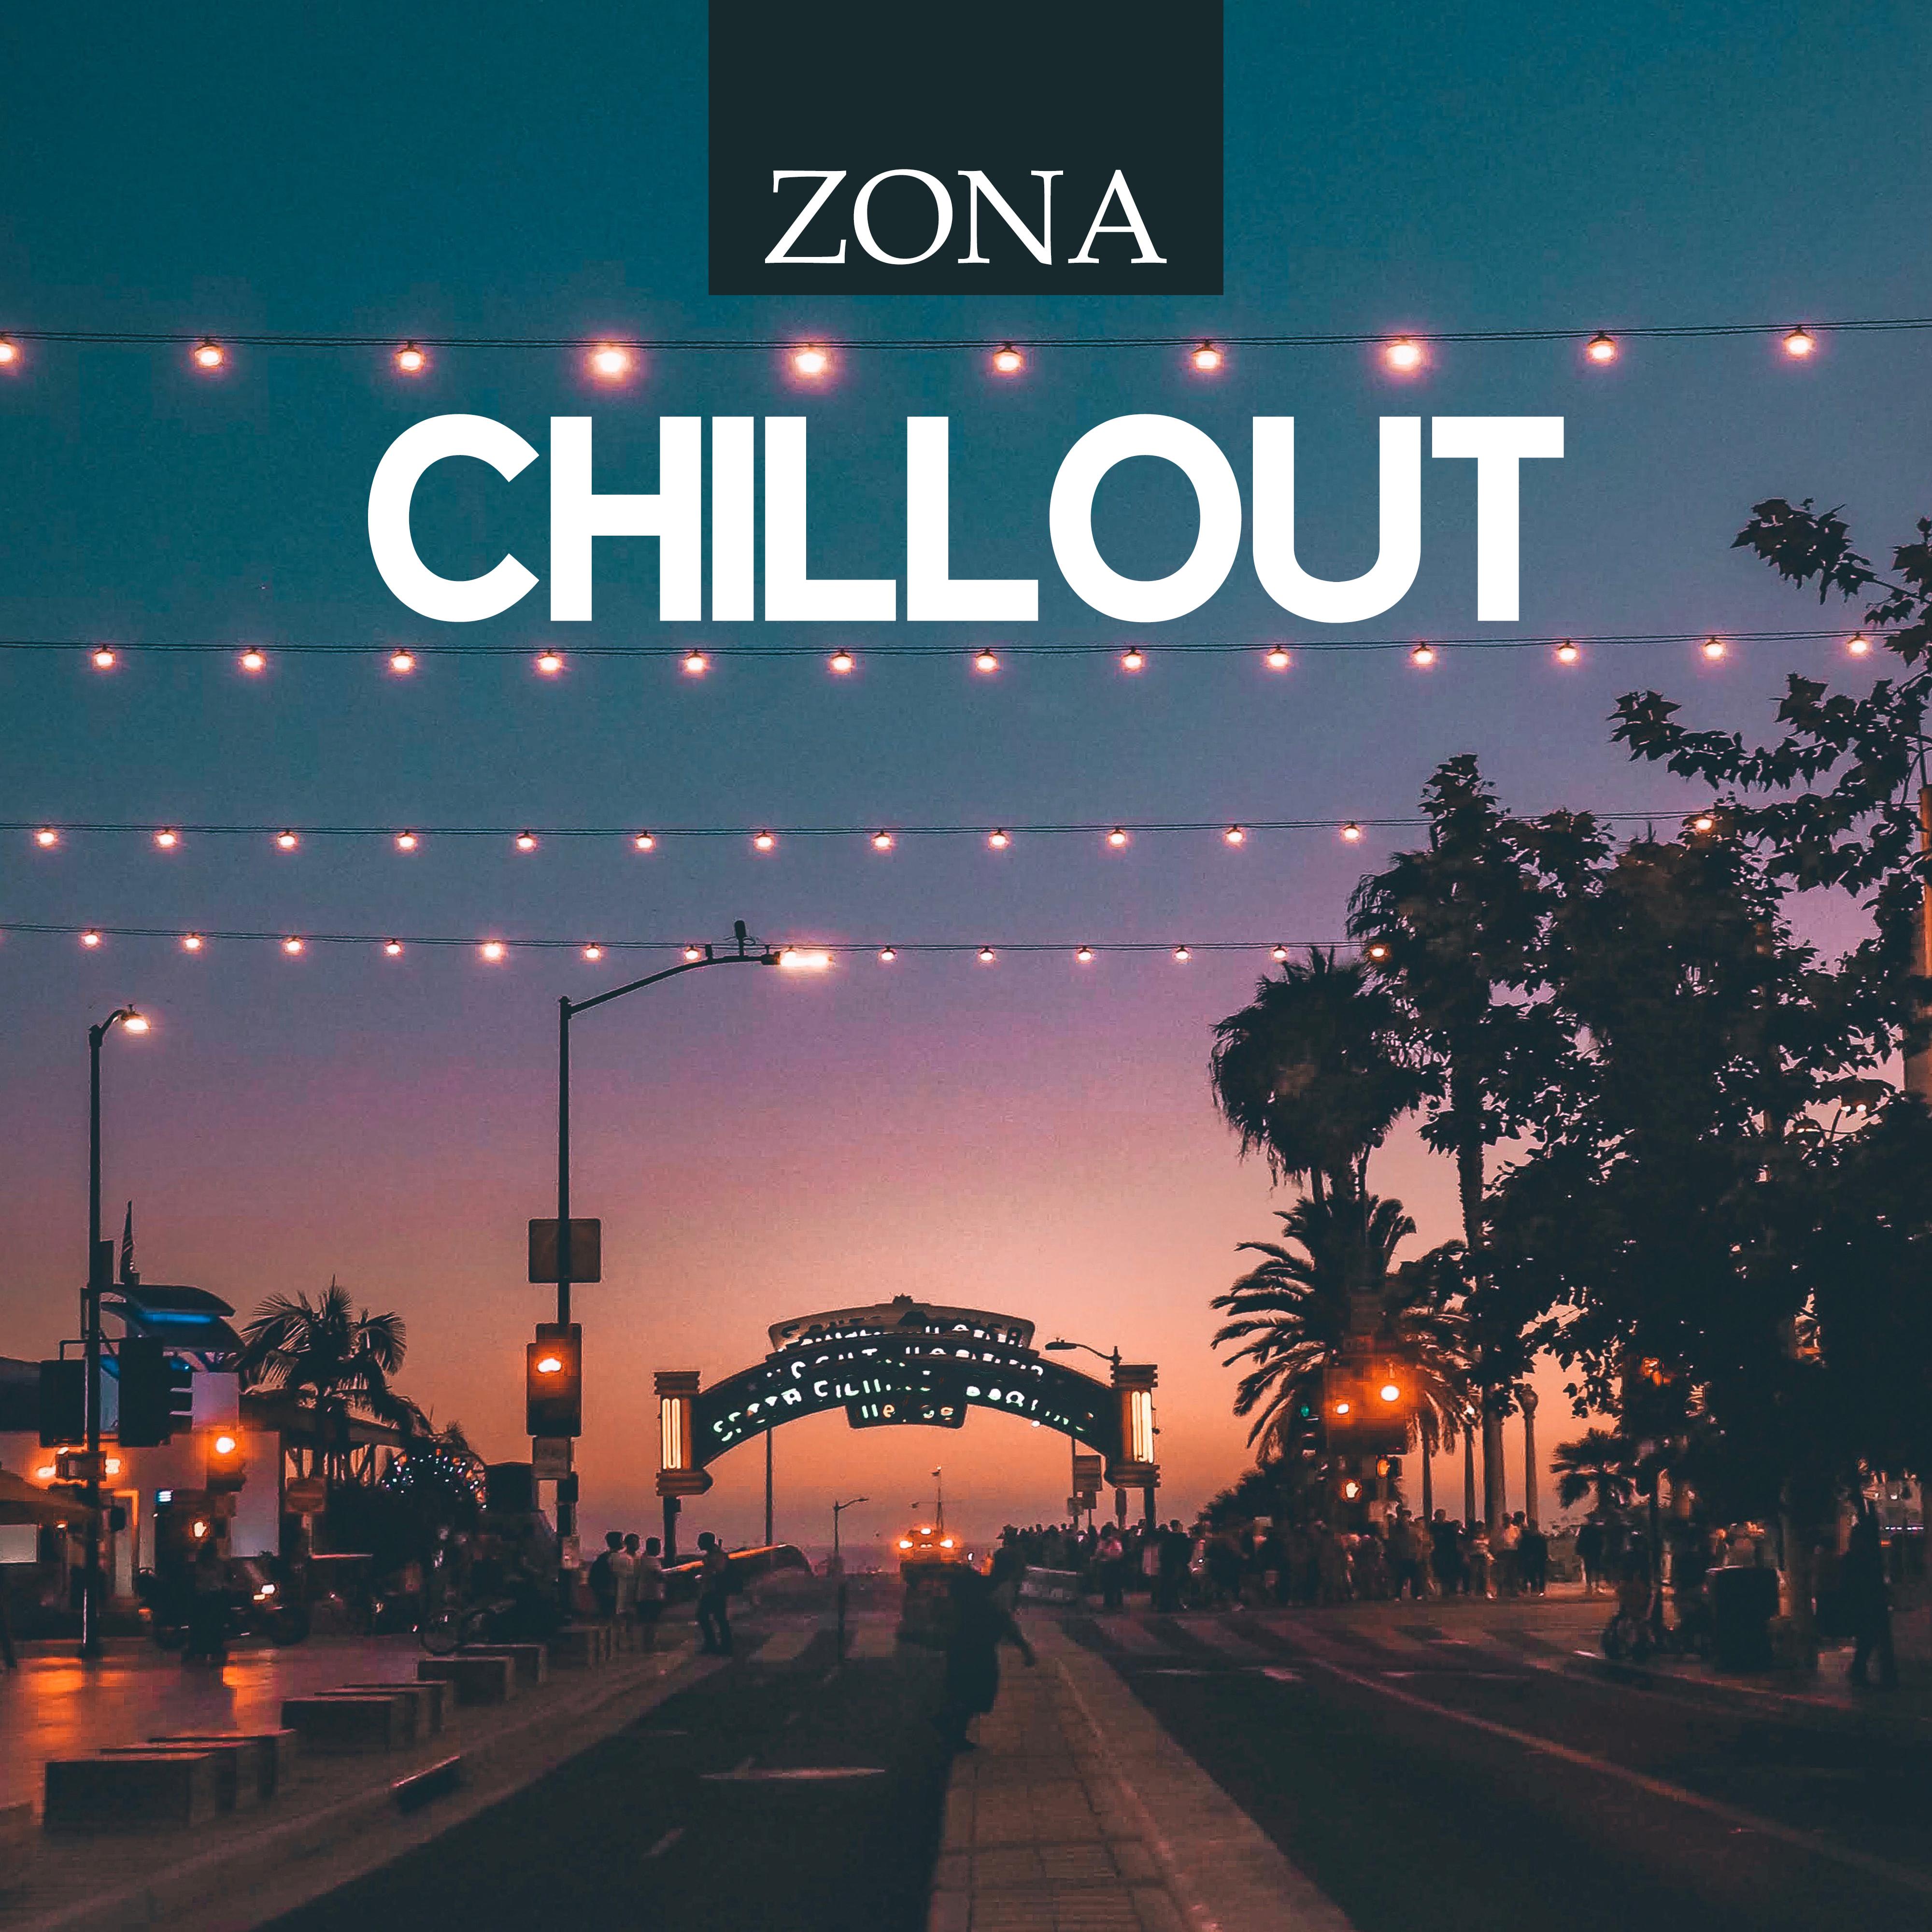 Zona Chillout